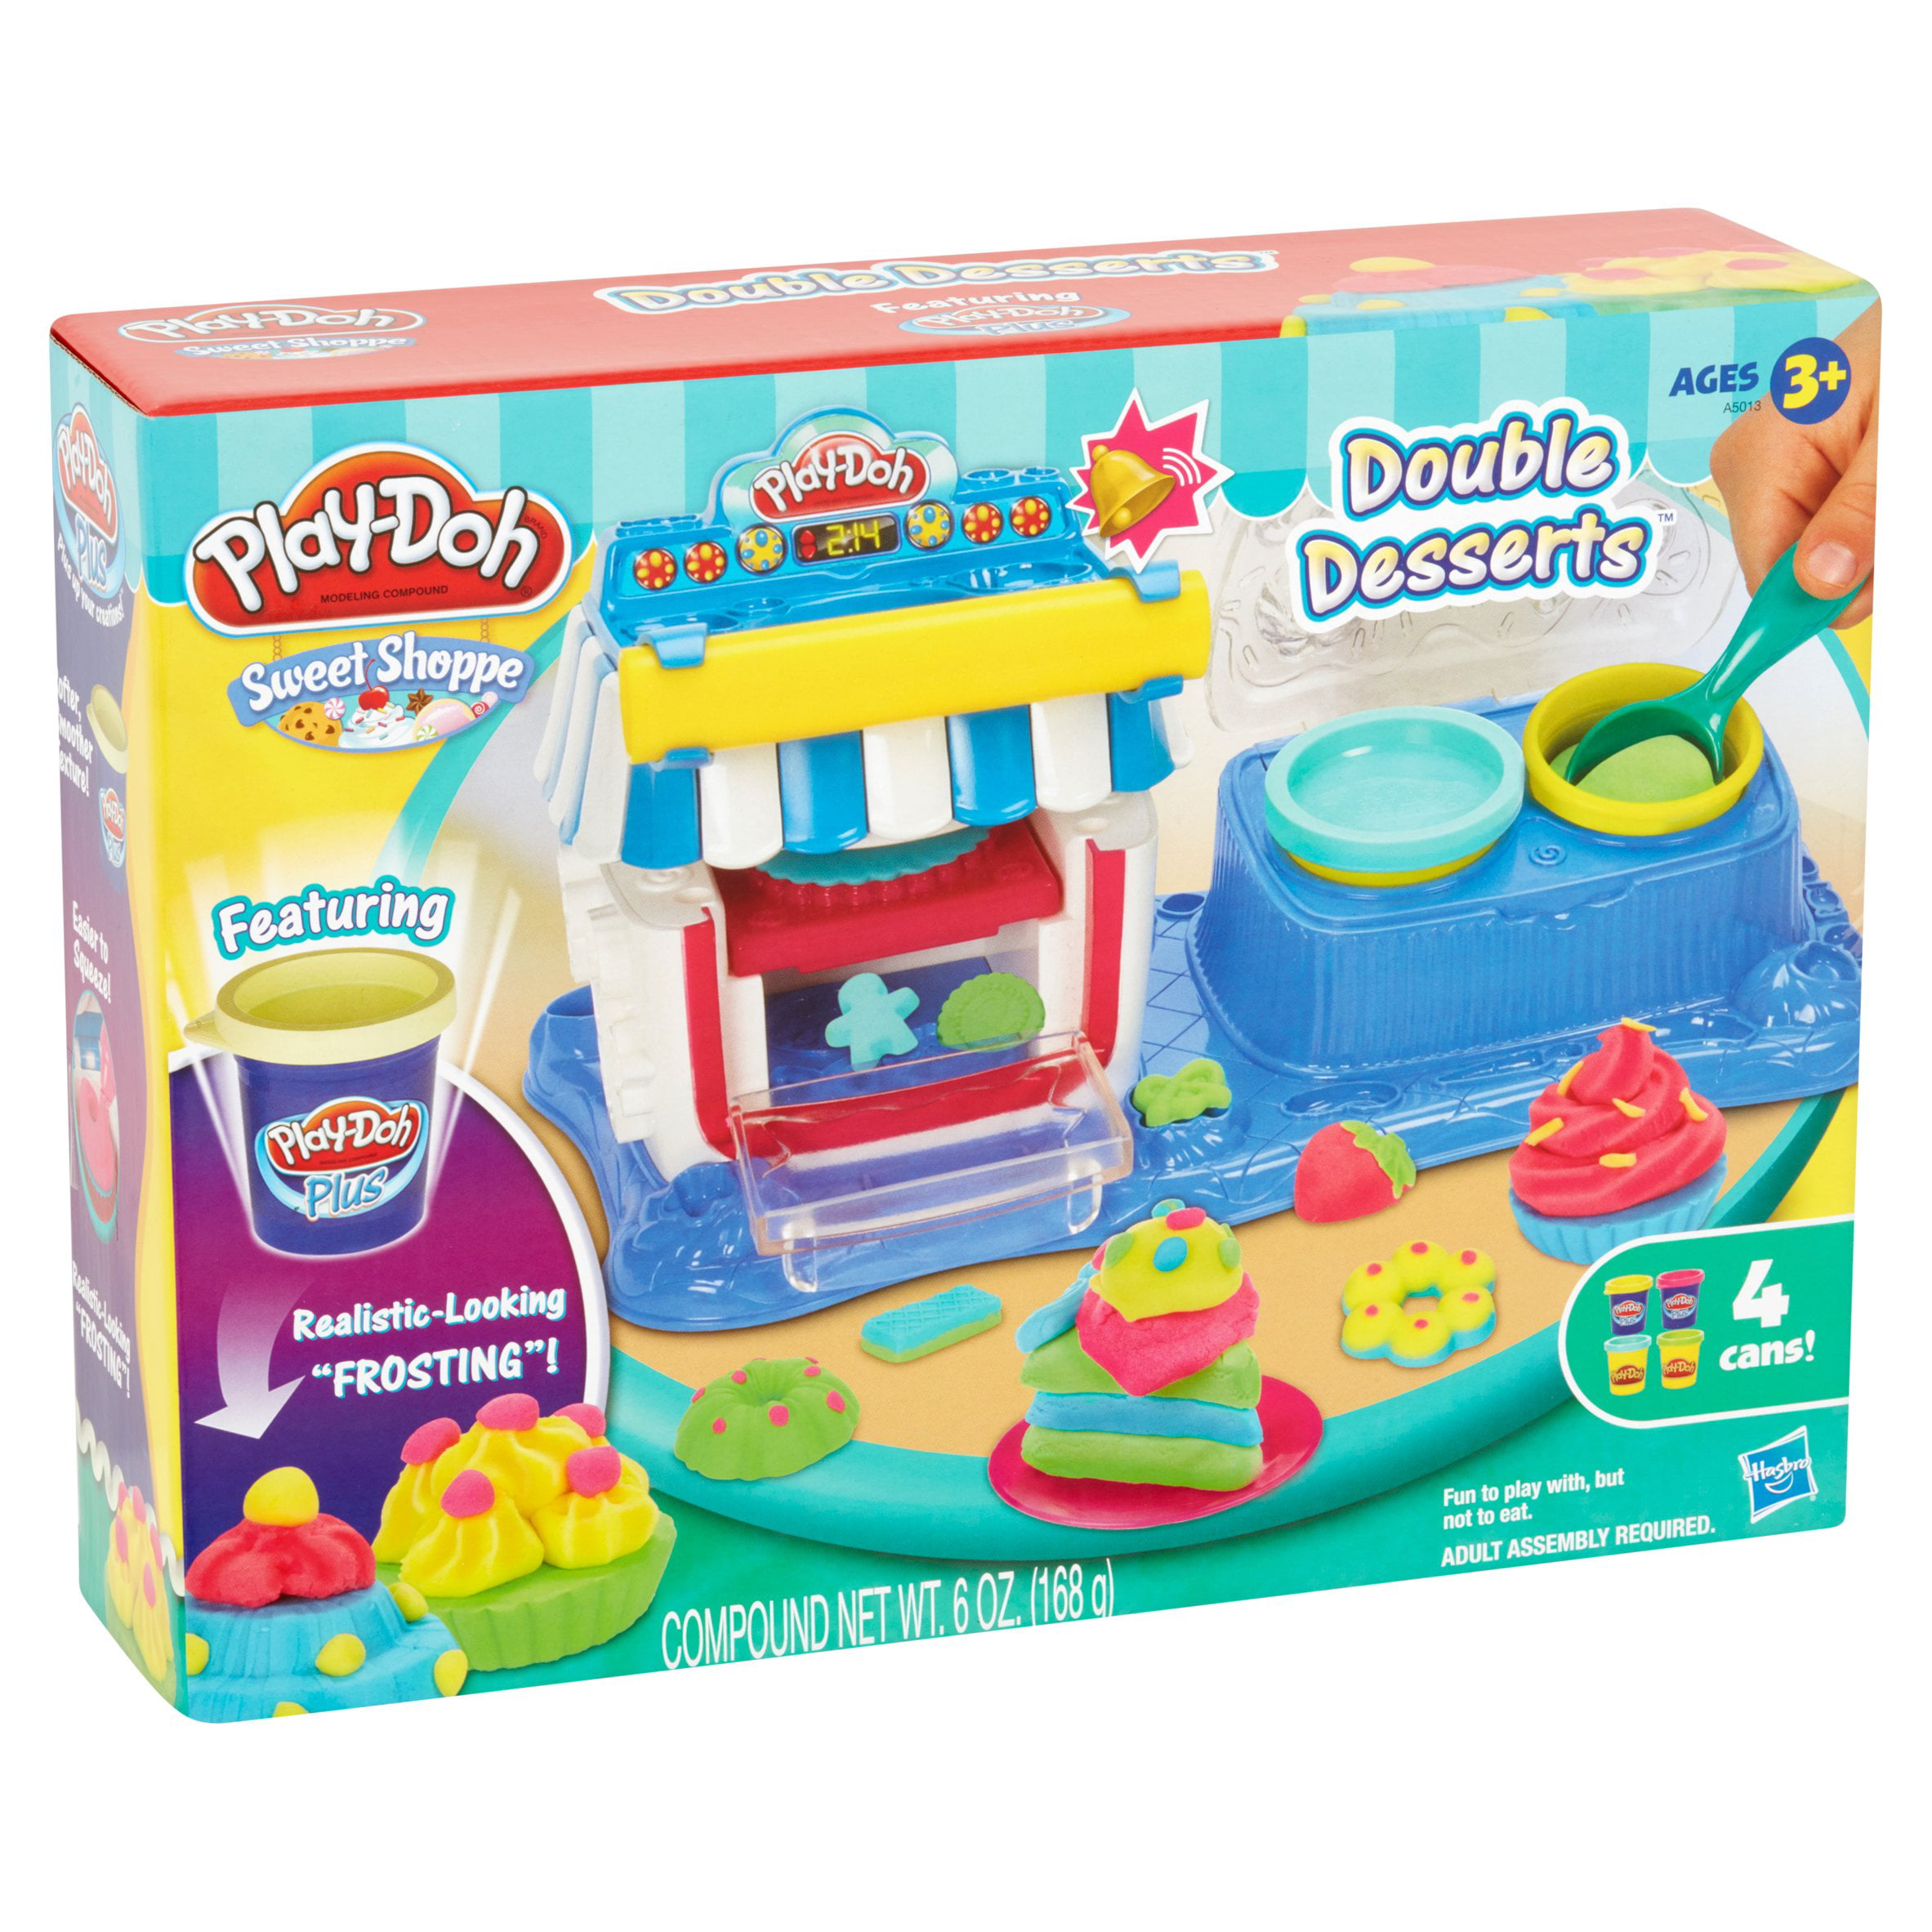 Play-Doh Sweet Shoppe Double Desserts 